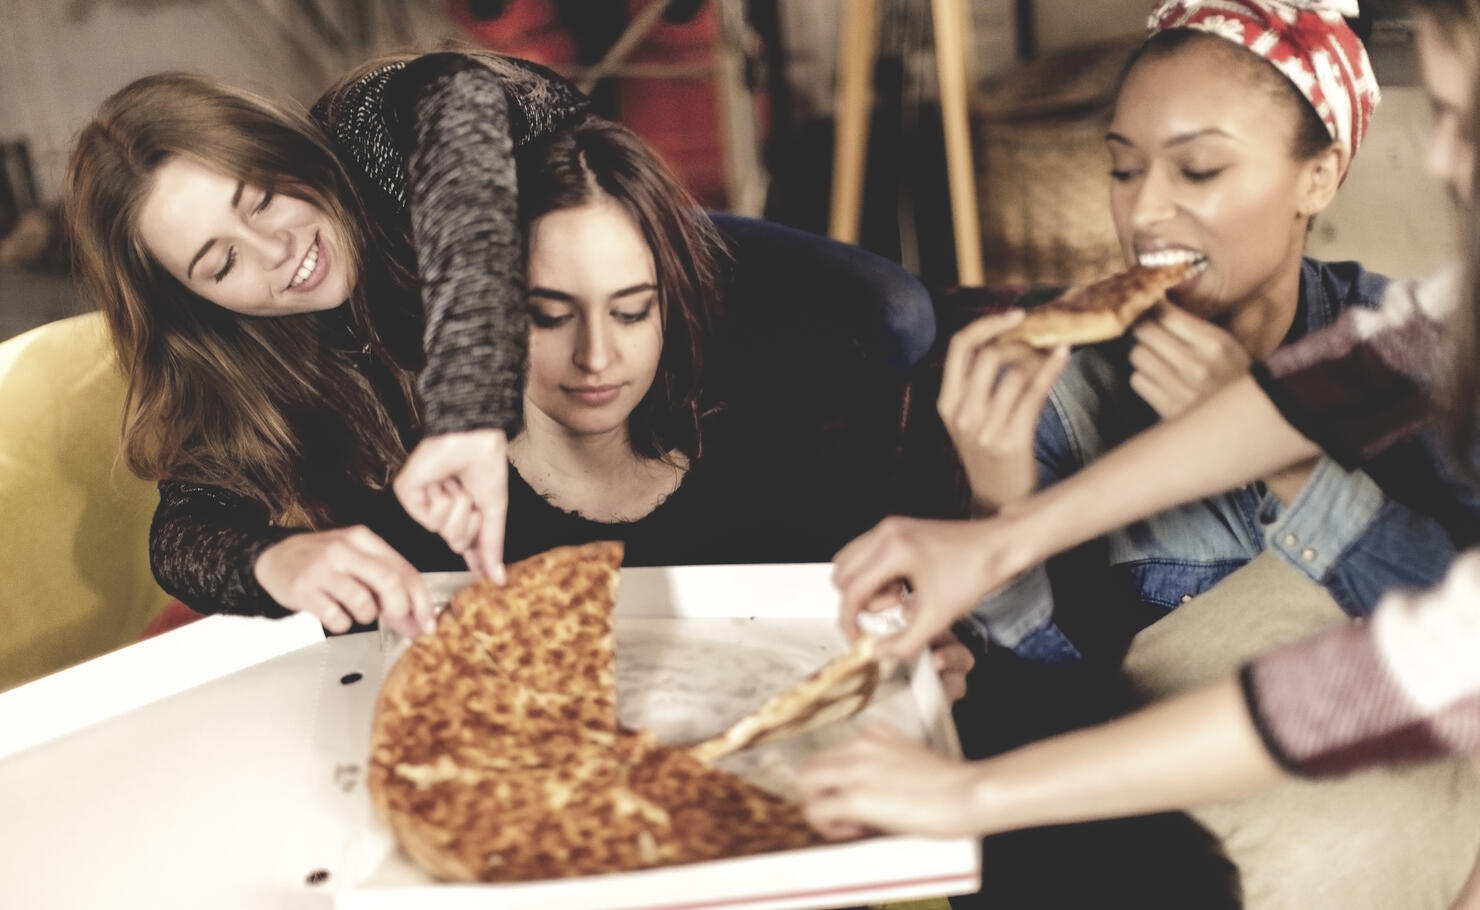 Four young women sitting round a table, eating pizza.